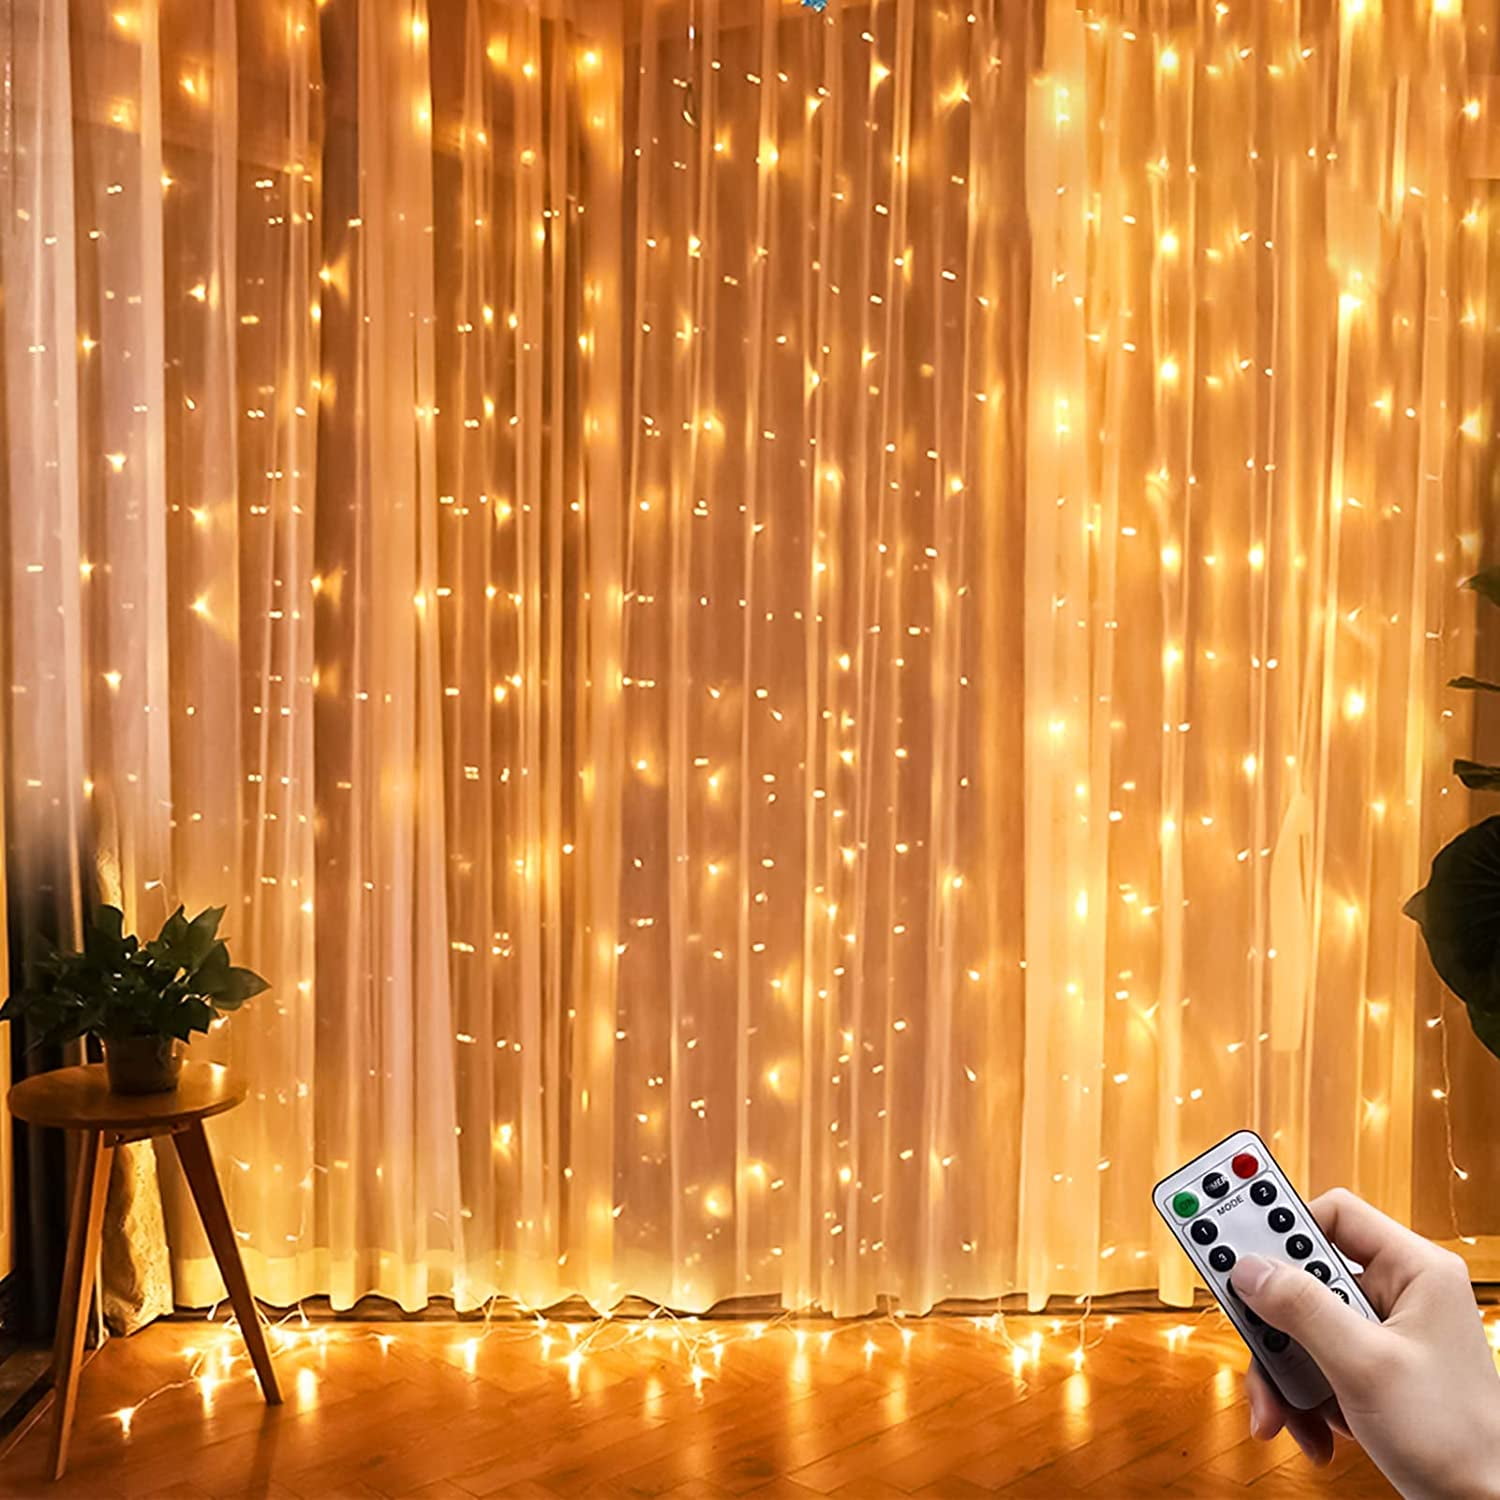 9.8*9.8ft 300 LED Curtain Fairy Lights Dimmable USB String Light for Xmas Party 